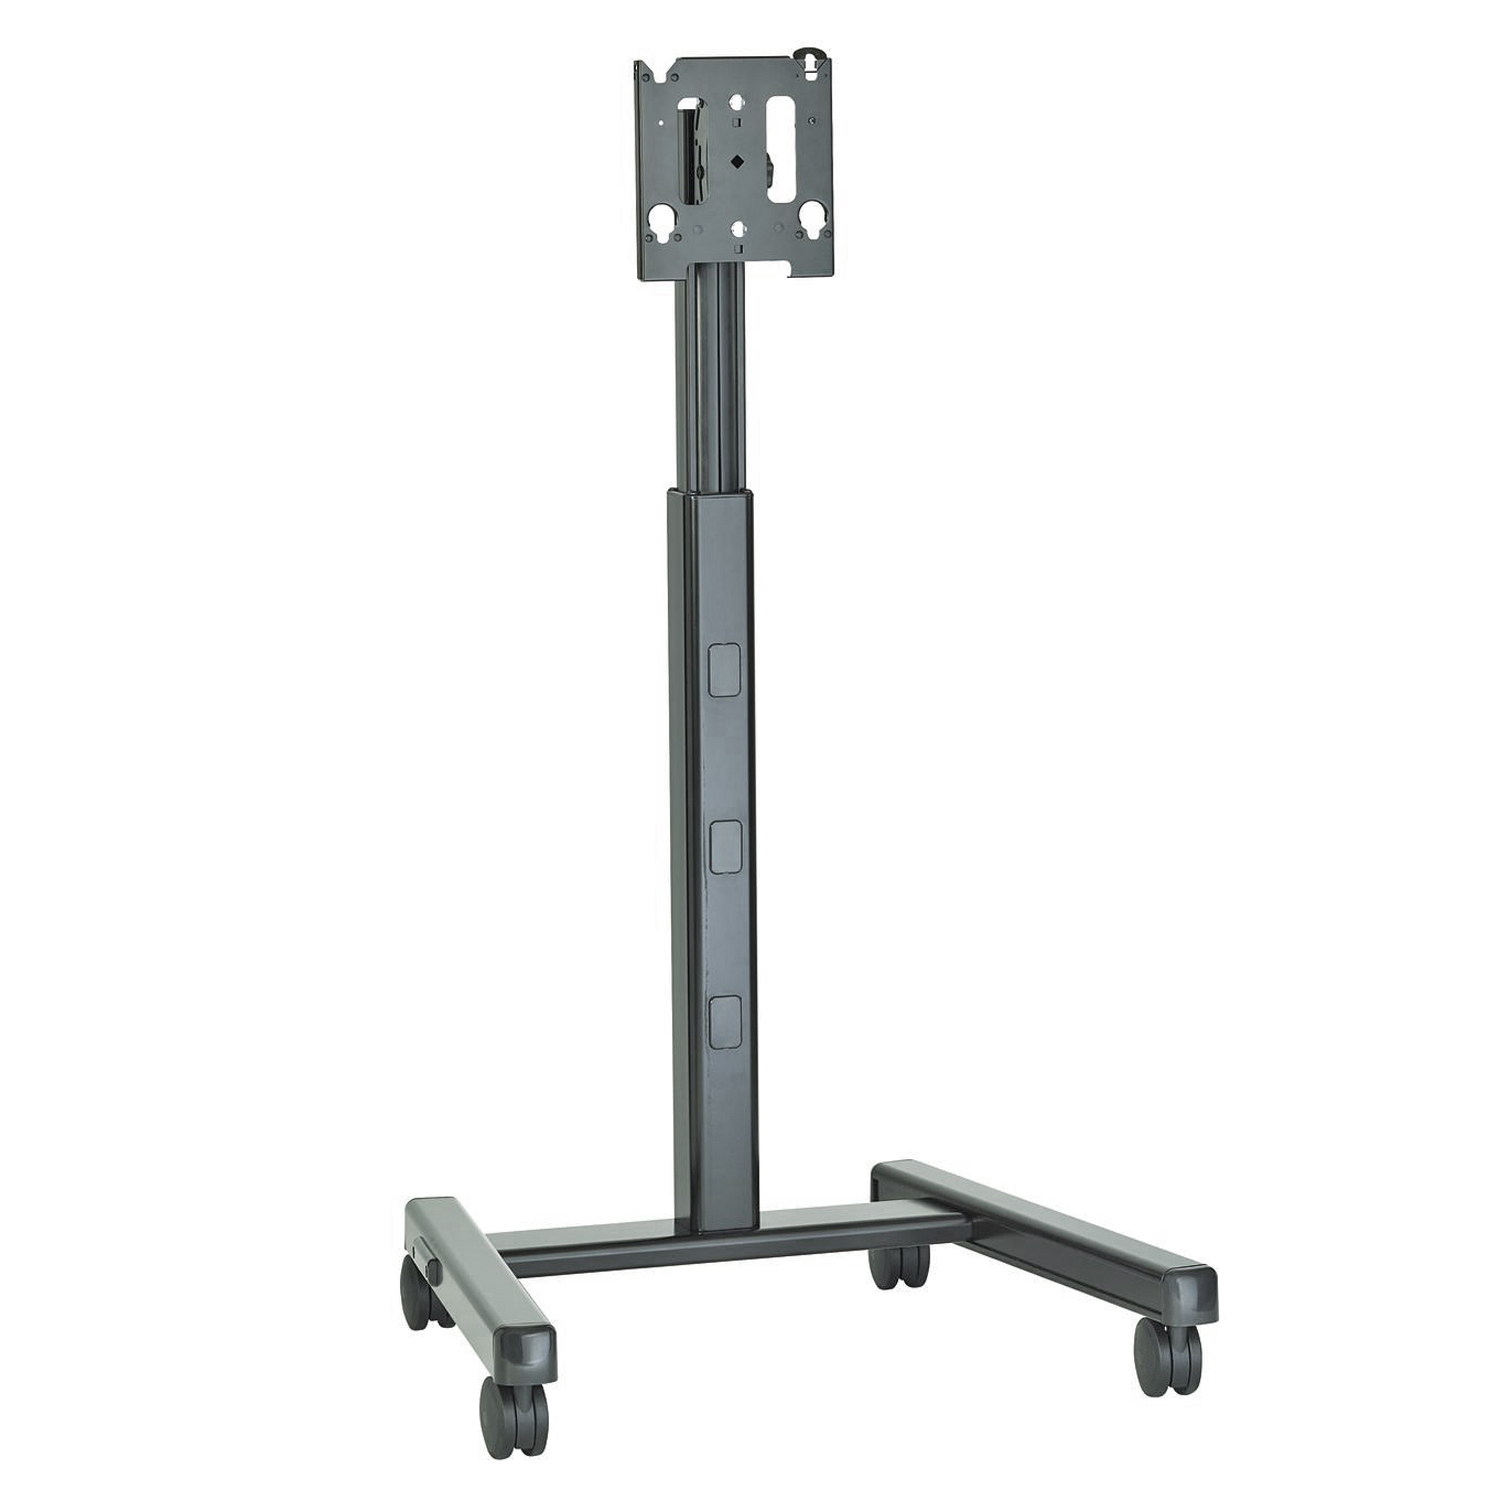 Display roll stand MFCU for 30-55 inch